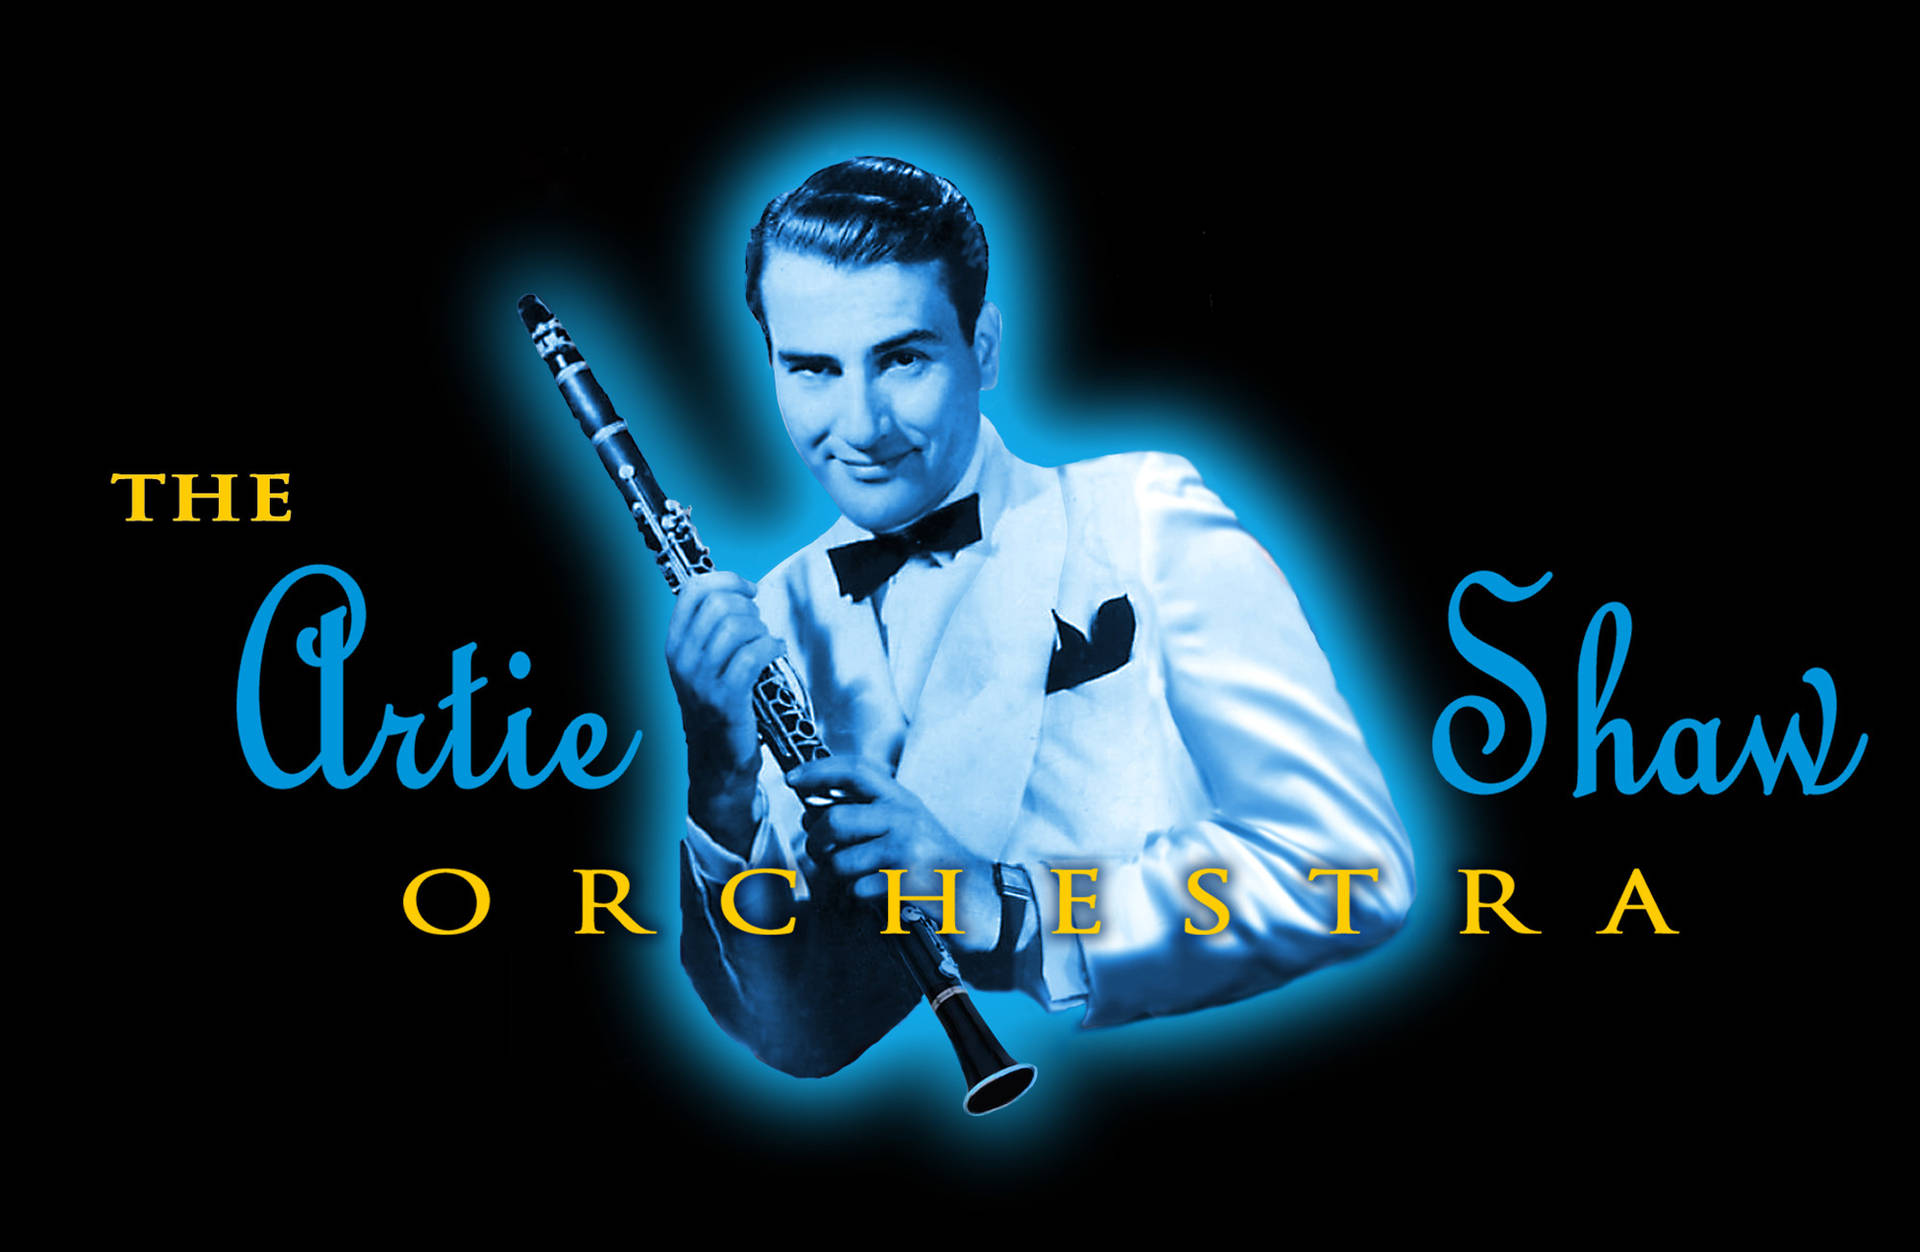 The Artie Shaw Orchestra Poster Wallpaper